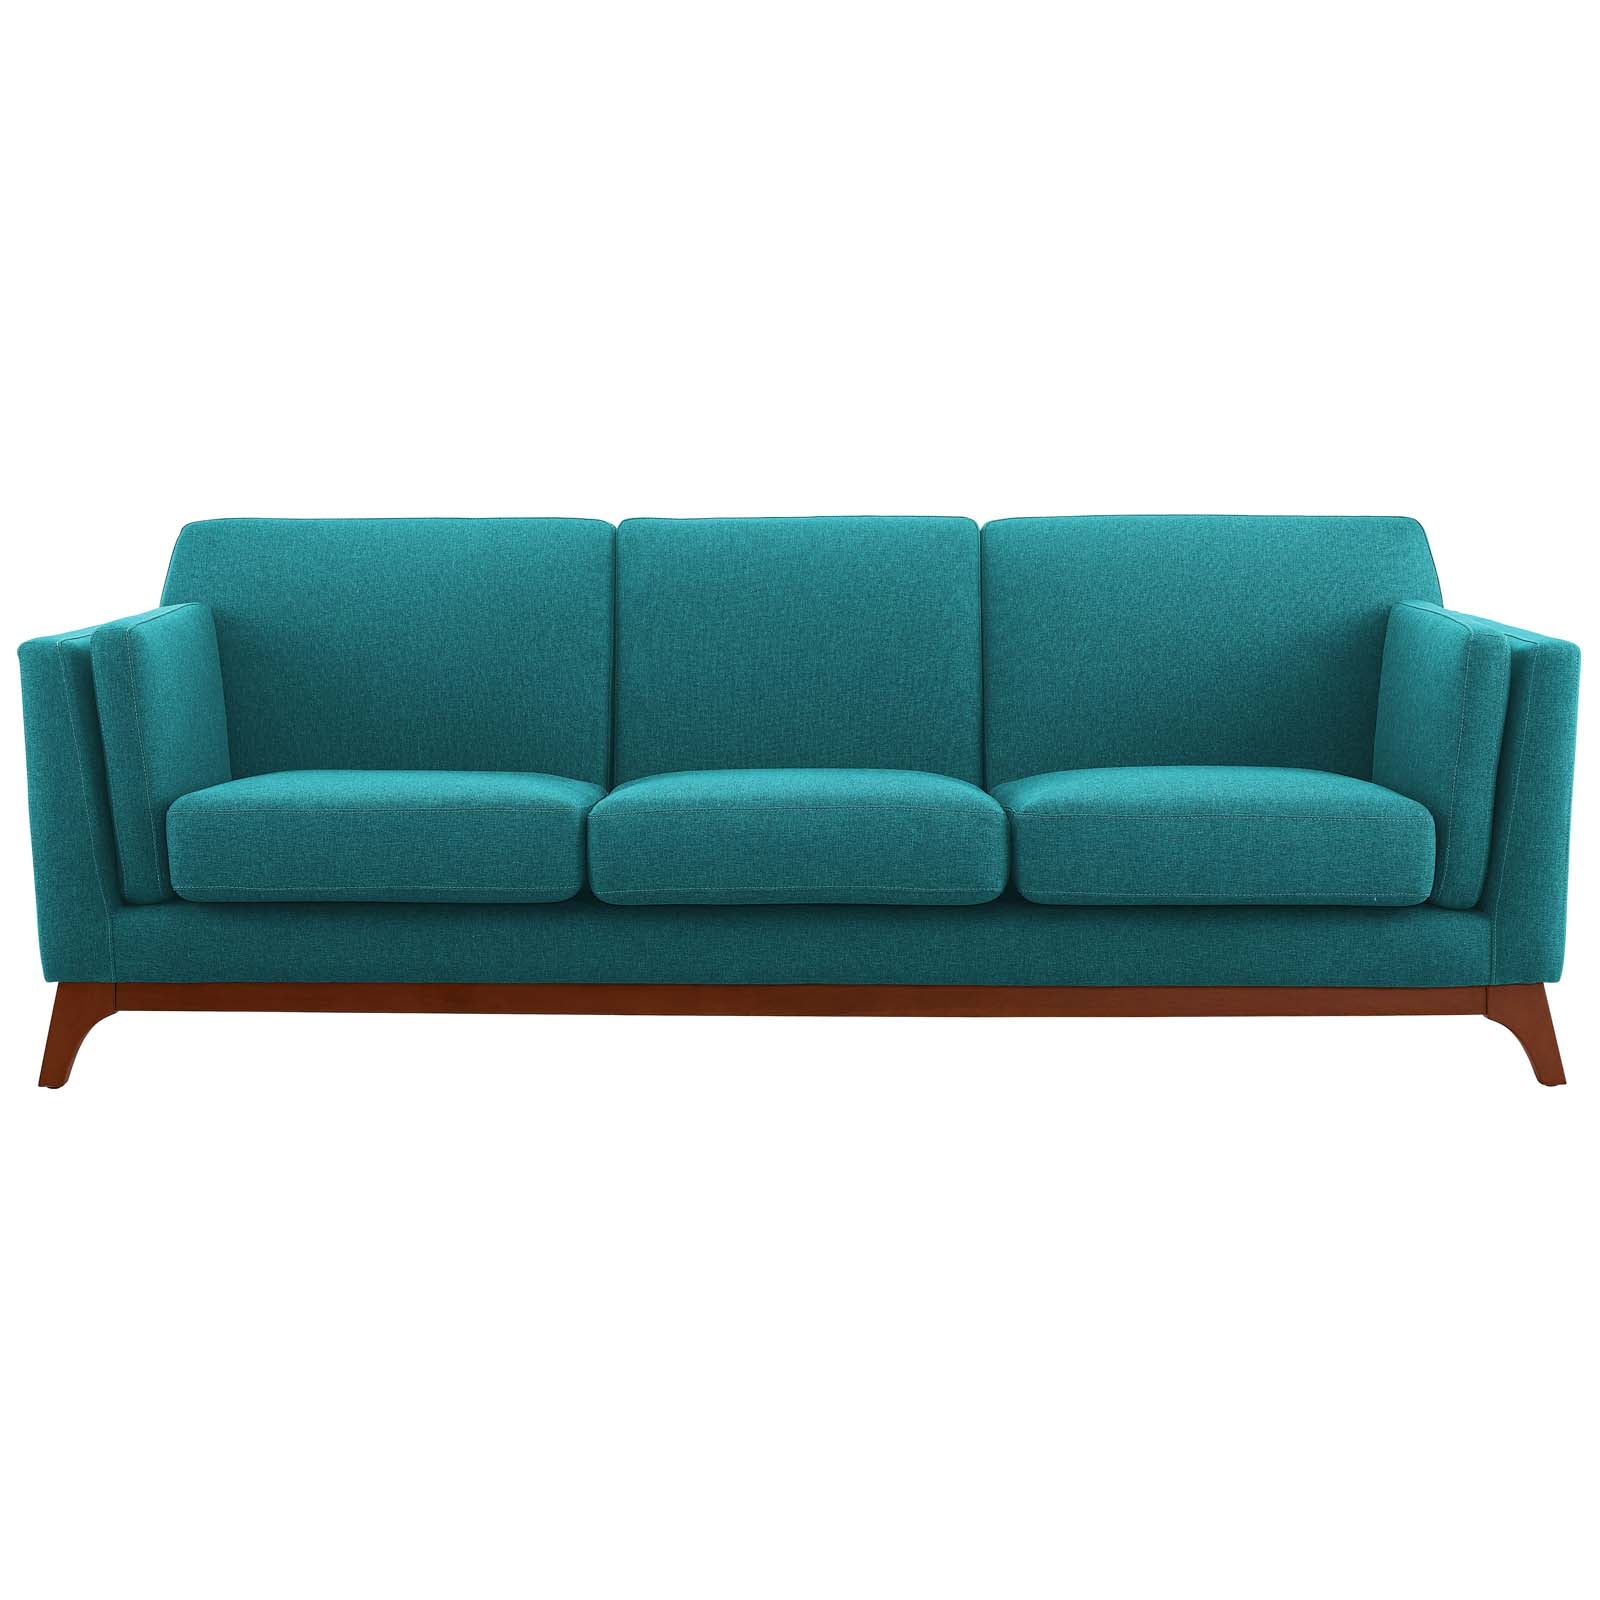 Modway Sofas & Couches - Chance Upholstered Fabric Sofa Teal